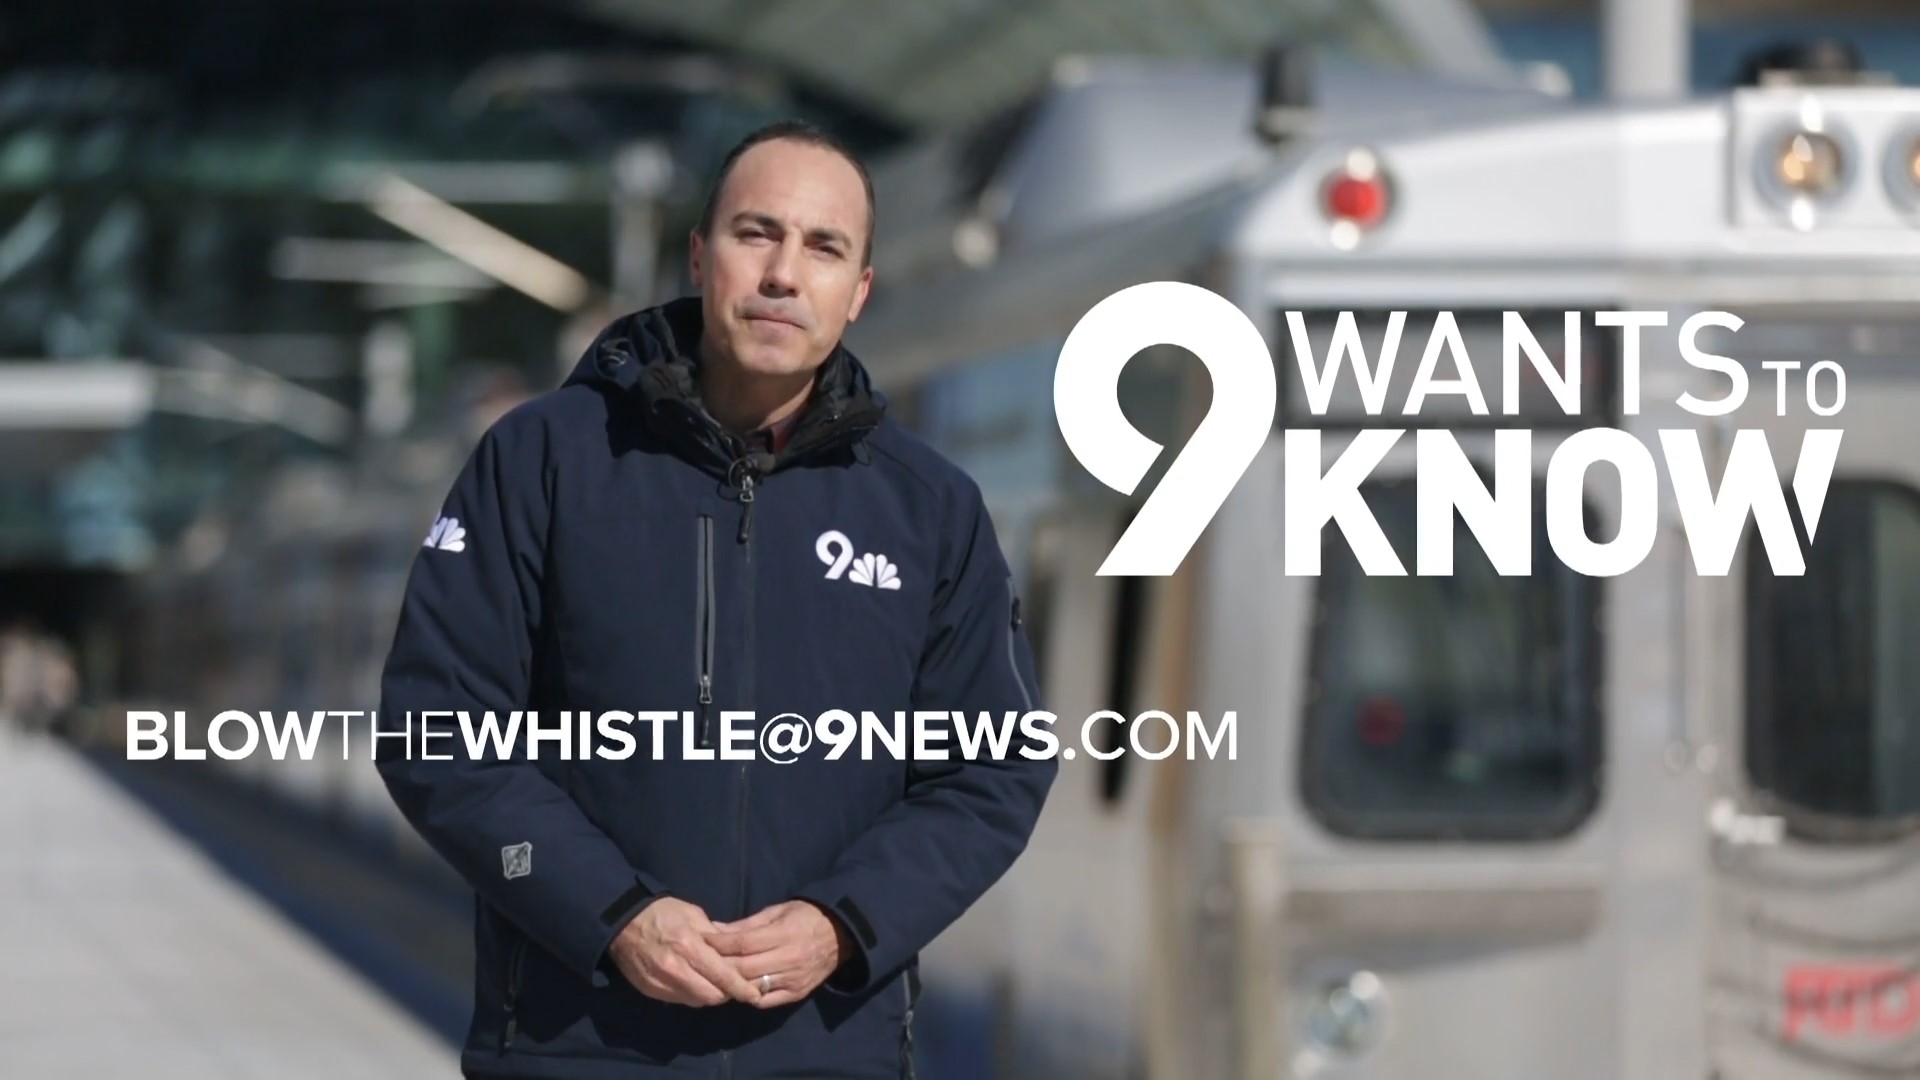 Have more information about a story we've covered or see something you'd like our investigative team to look into? E-mail blowthewhistle@9news.com.